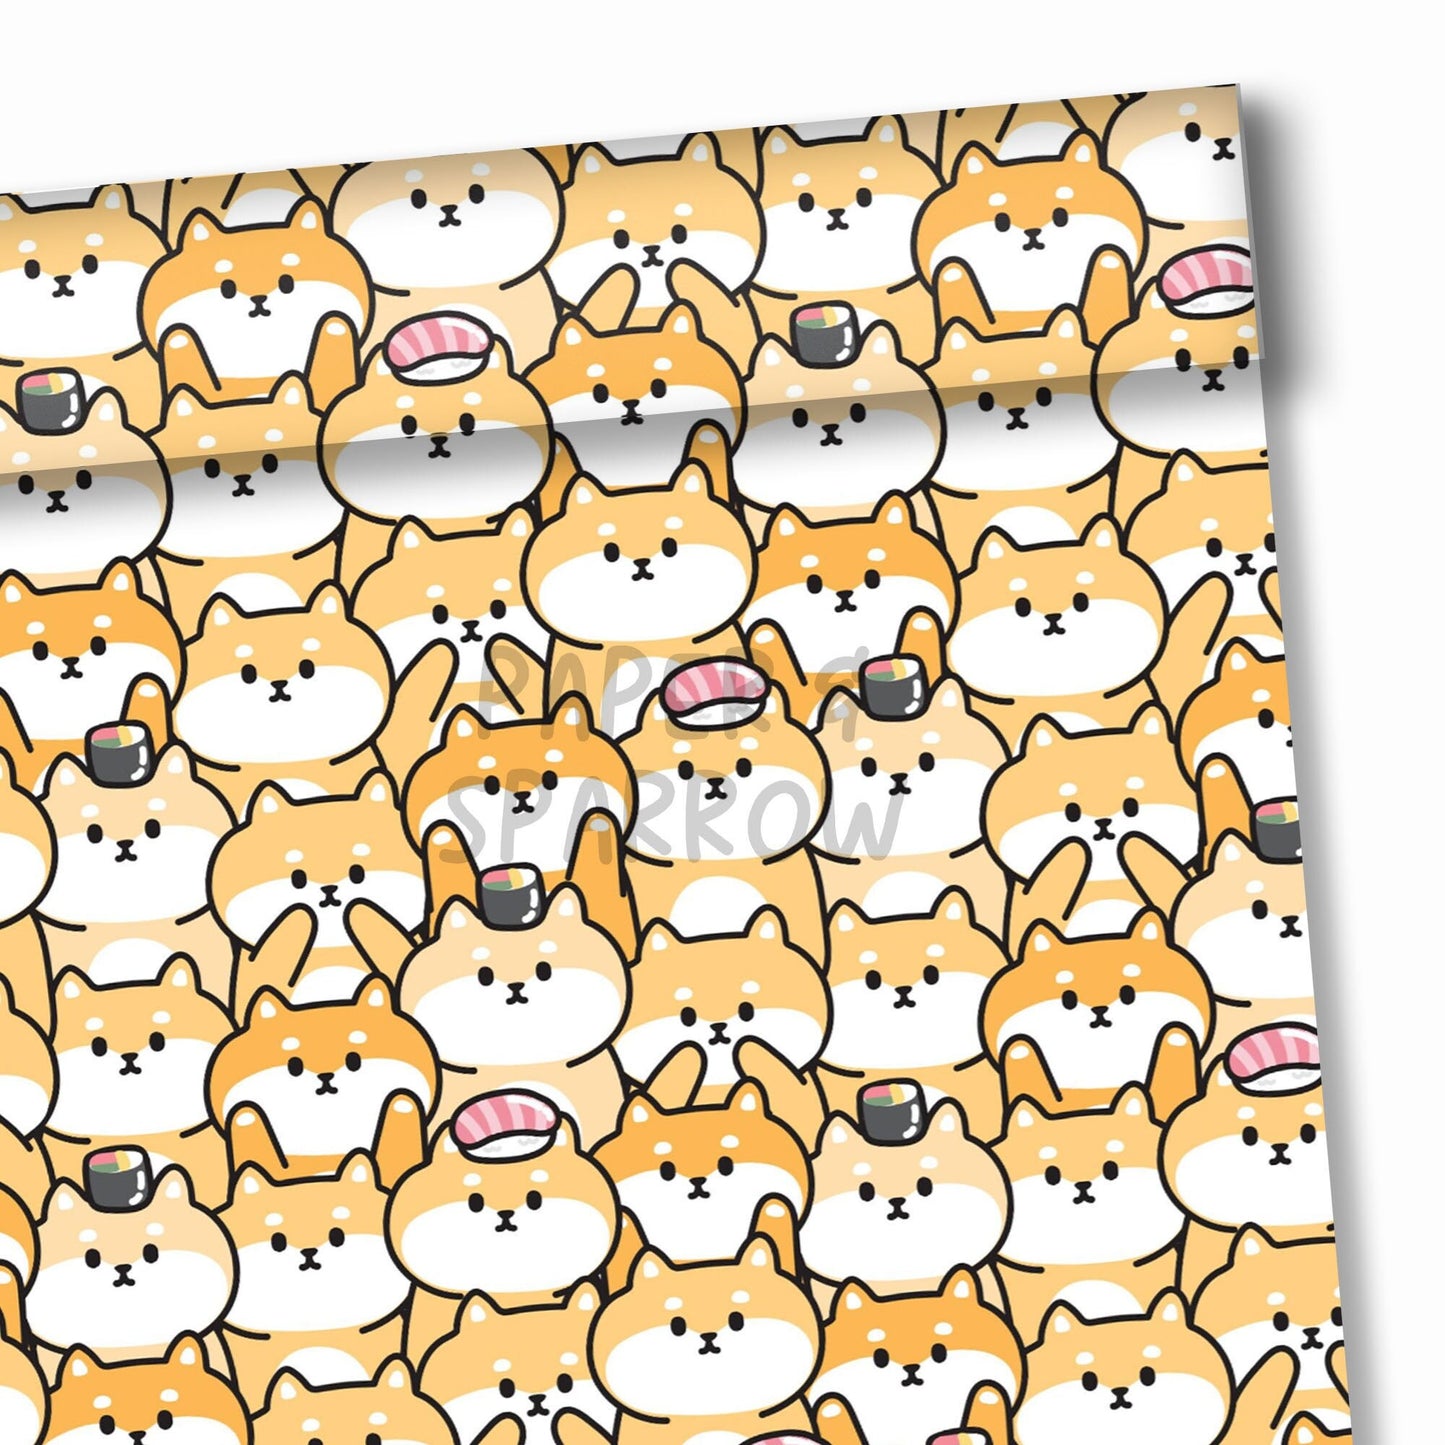 Shiba Inu Kawaii Dog Wrapping Paper, Birthday Wrapping Paper, Cute Gift Wrap, Kids Gift Present Paper Roll for Her